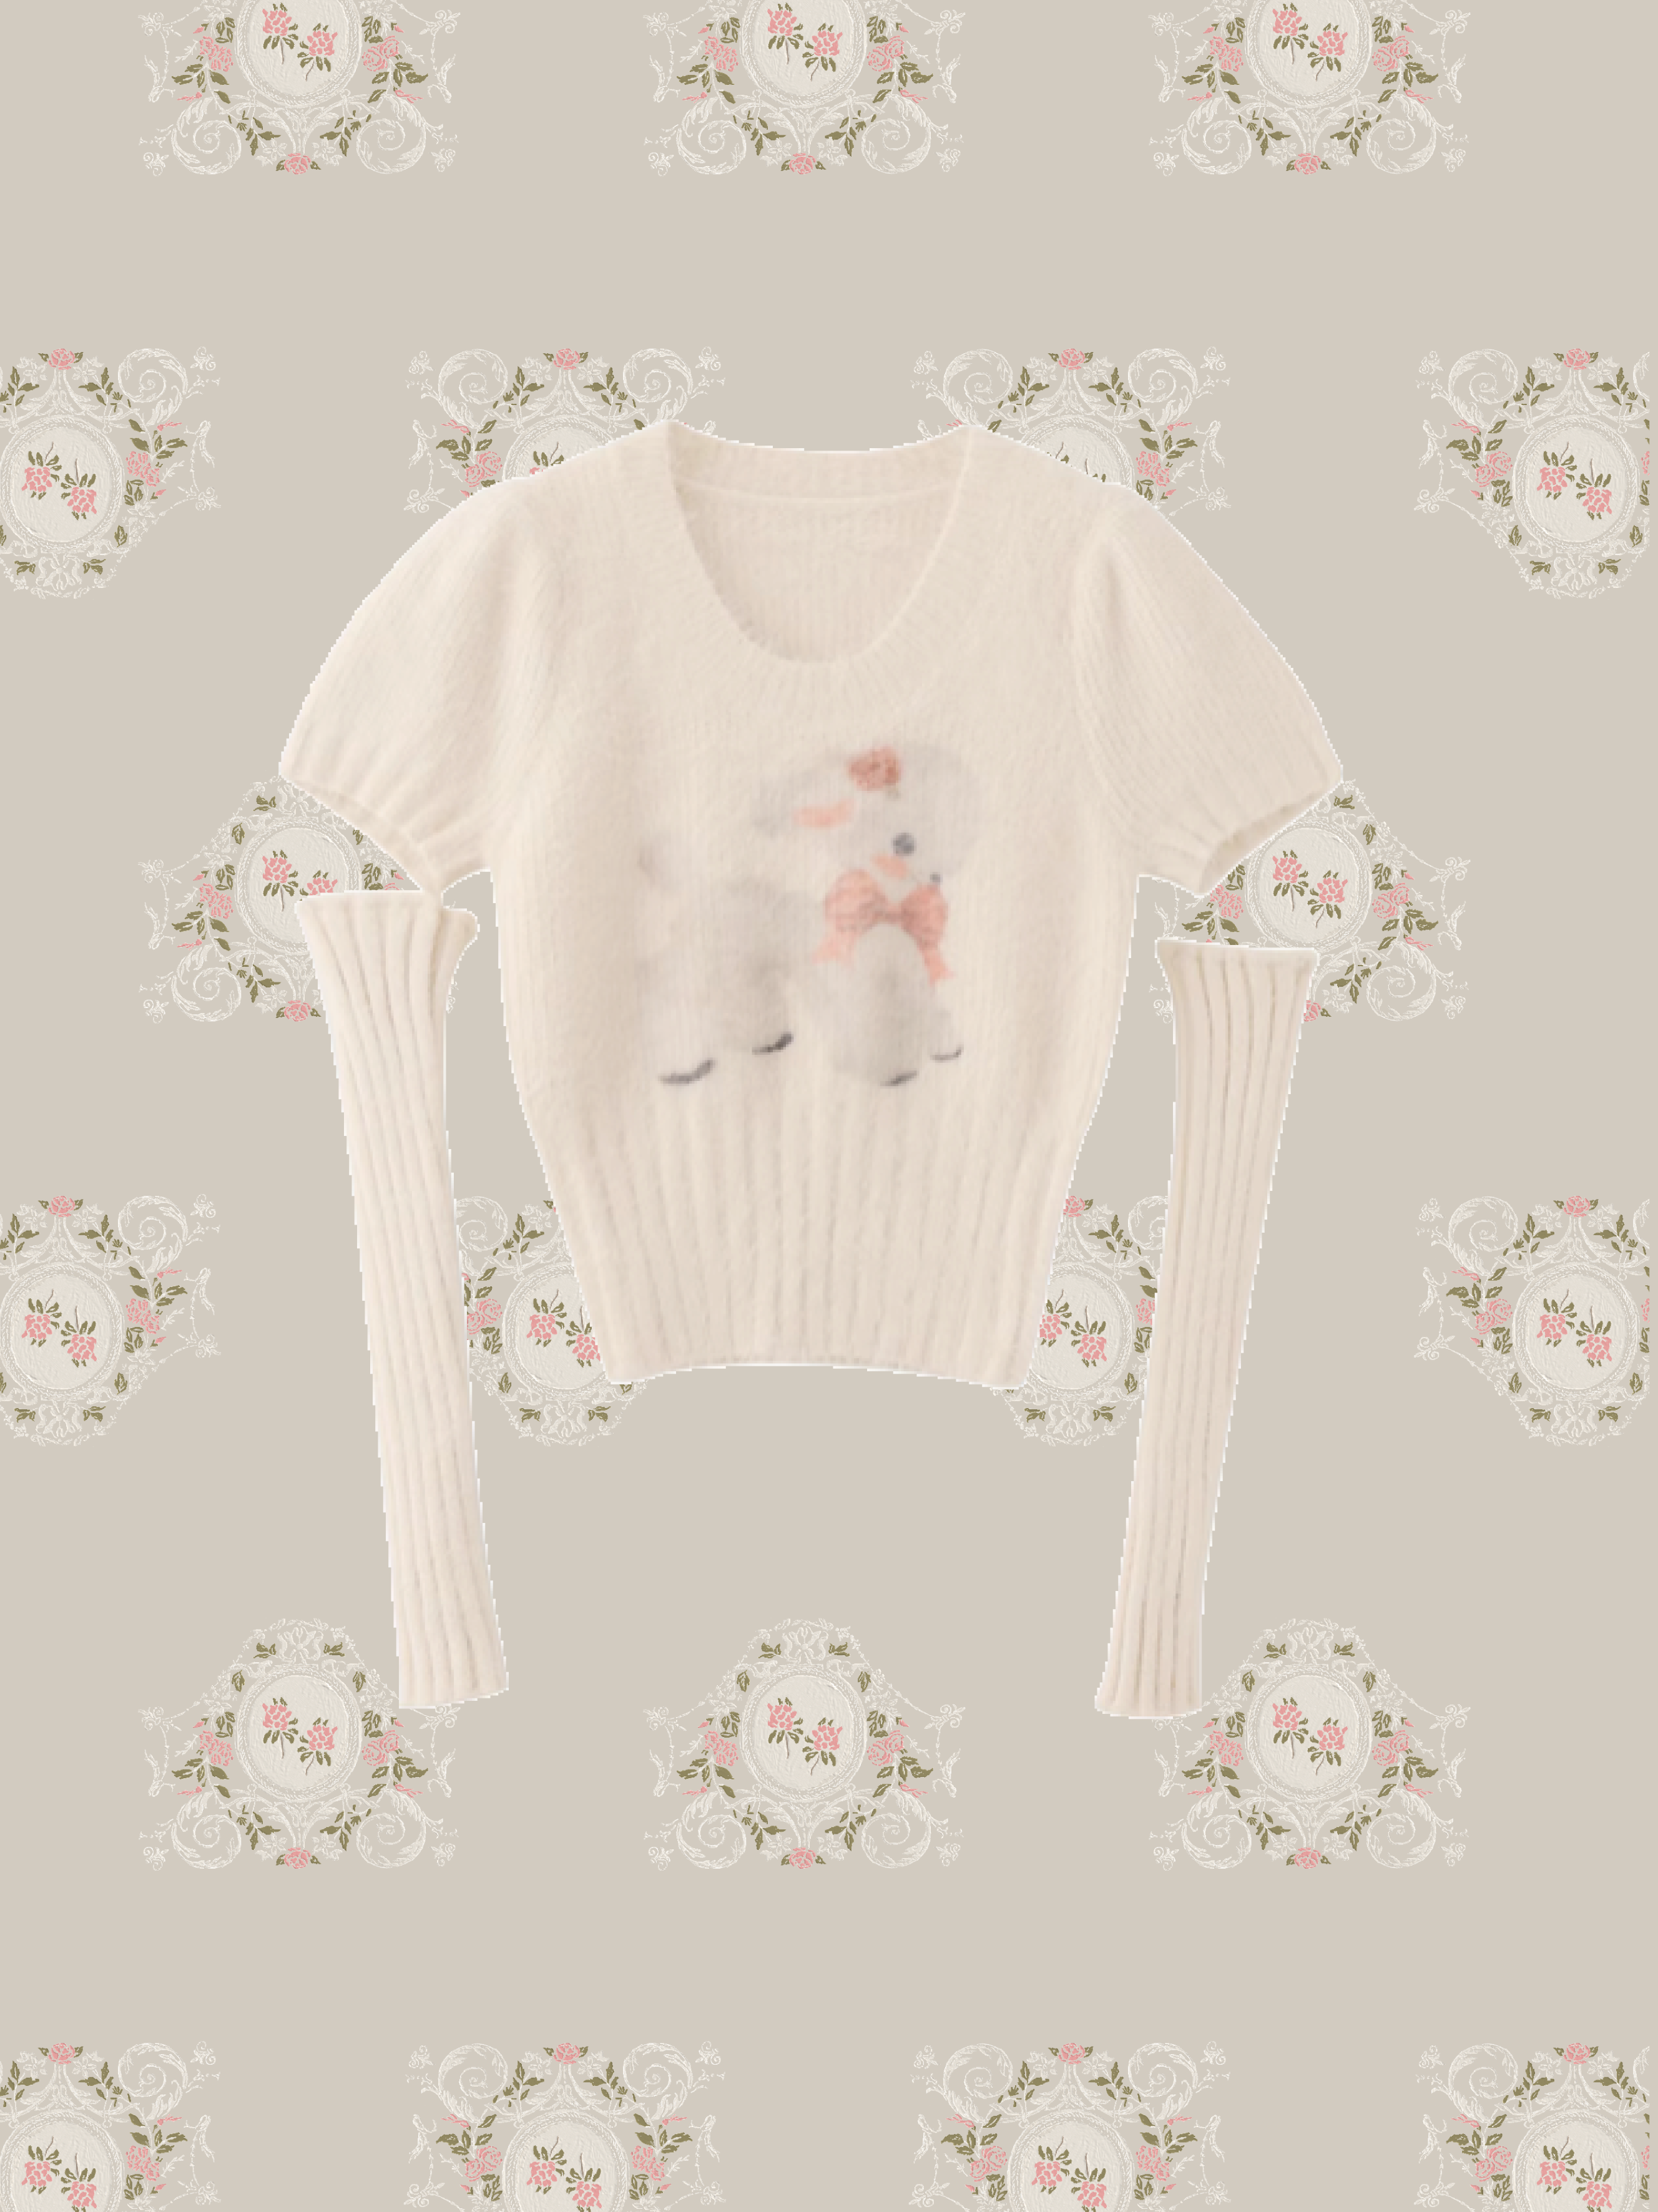 Fitted Doggy Embroidery Knit Top  フィットドギー刺繍ニットトップ